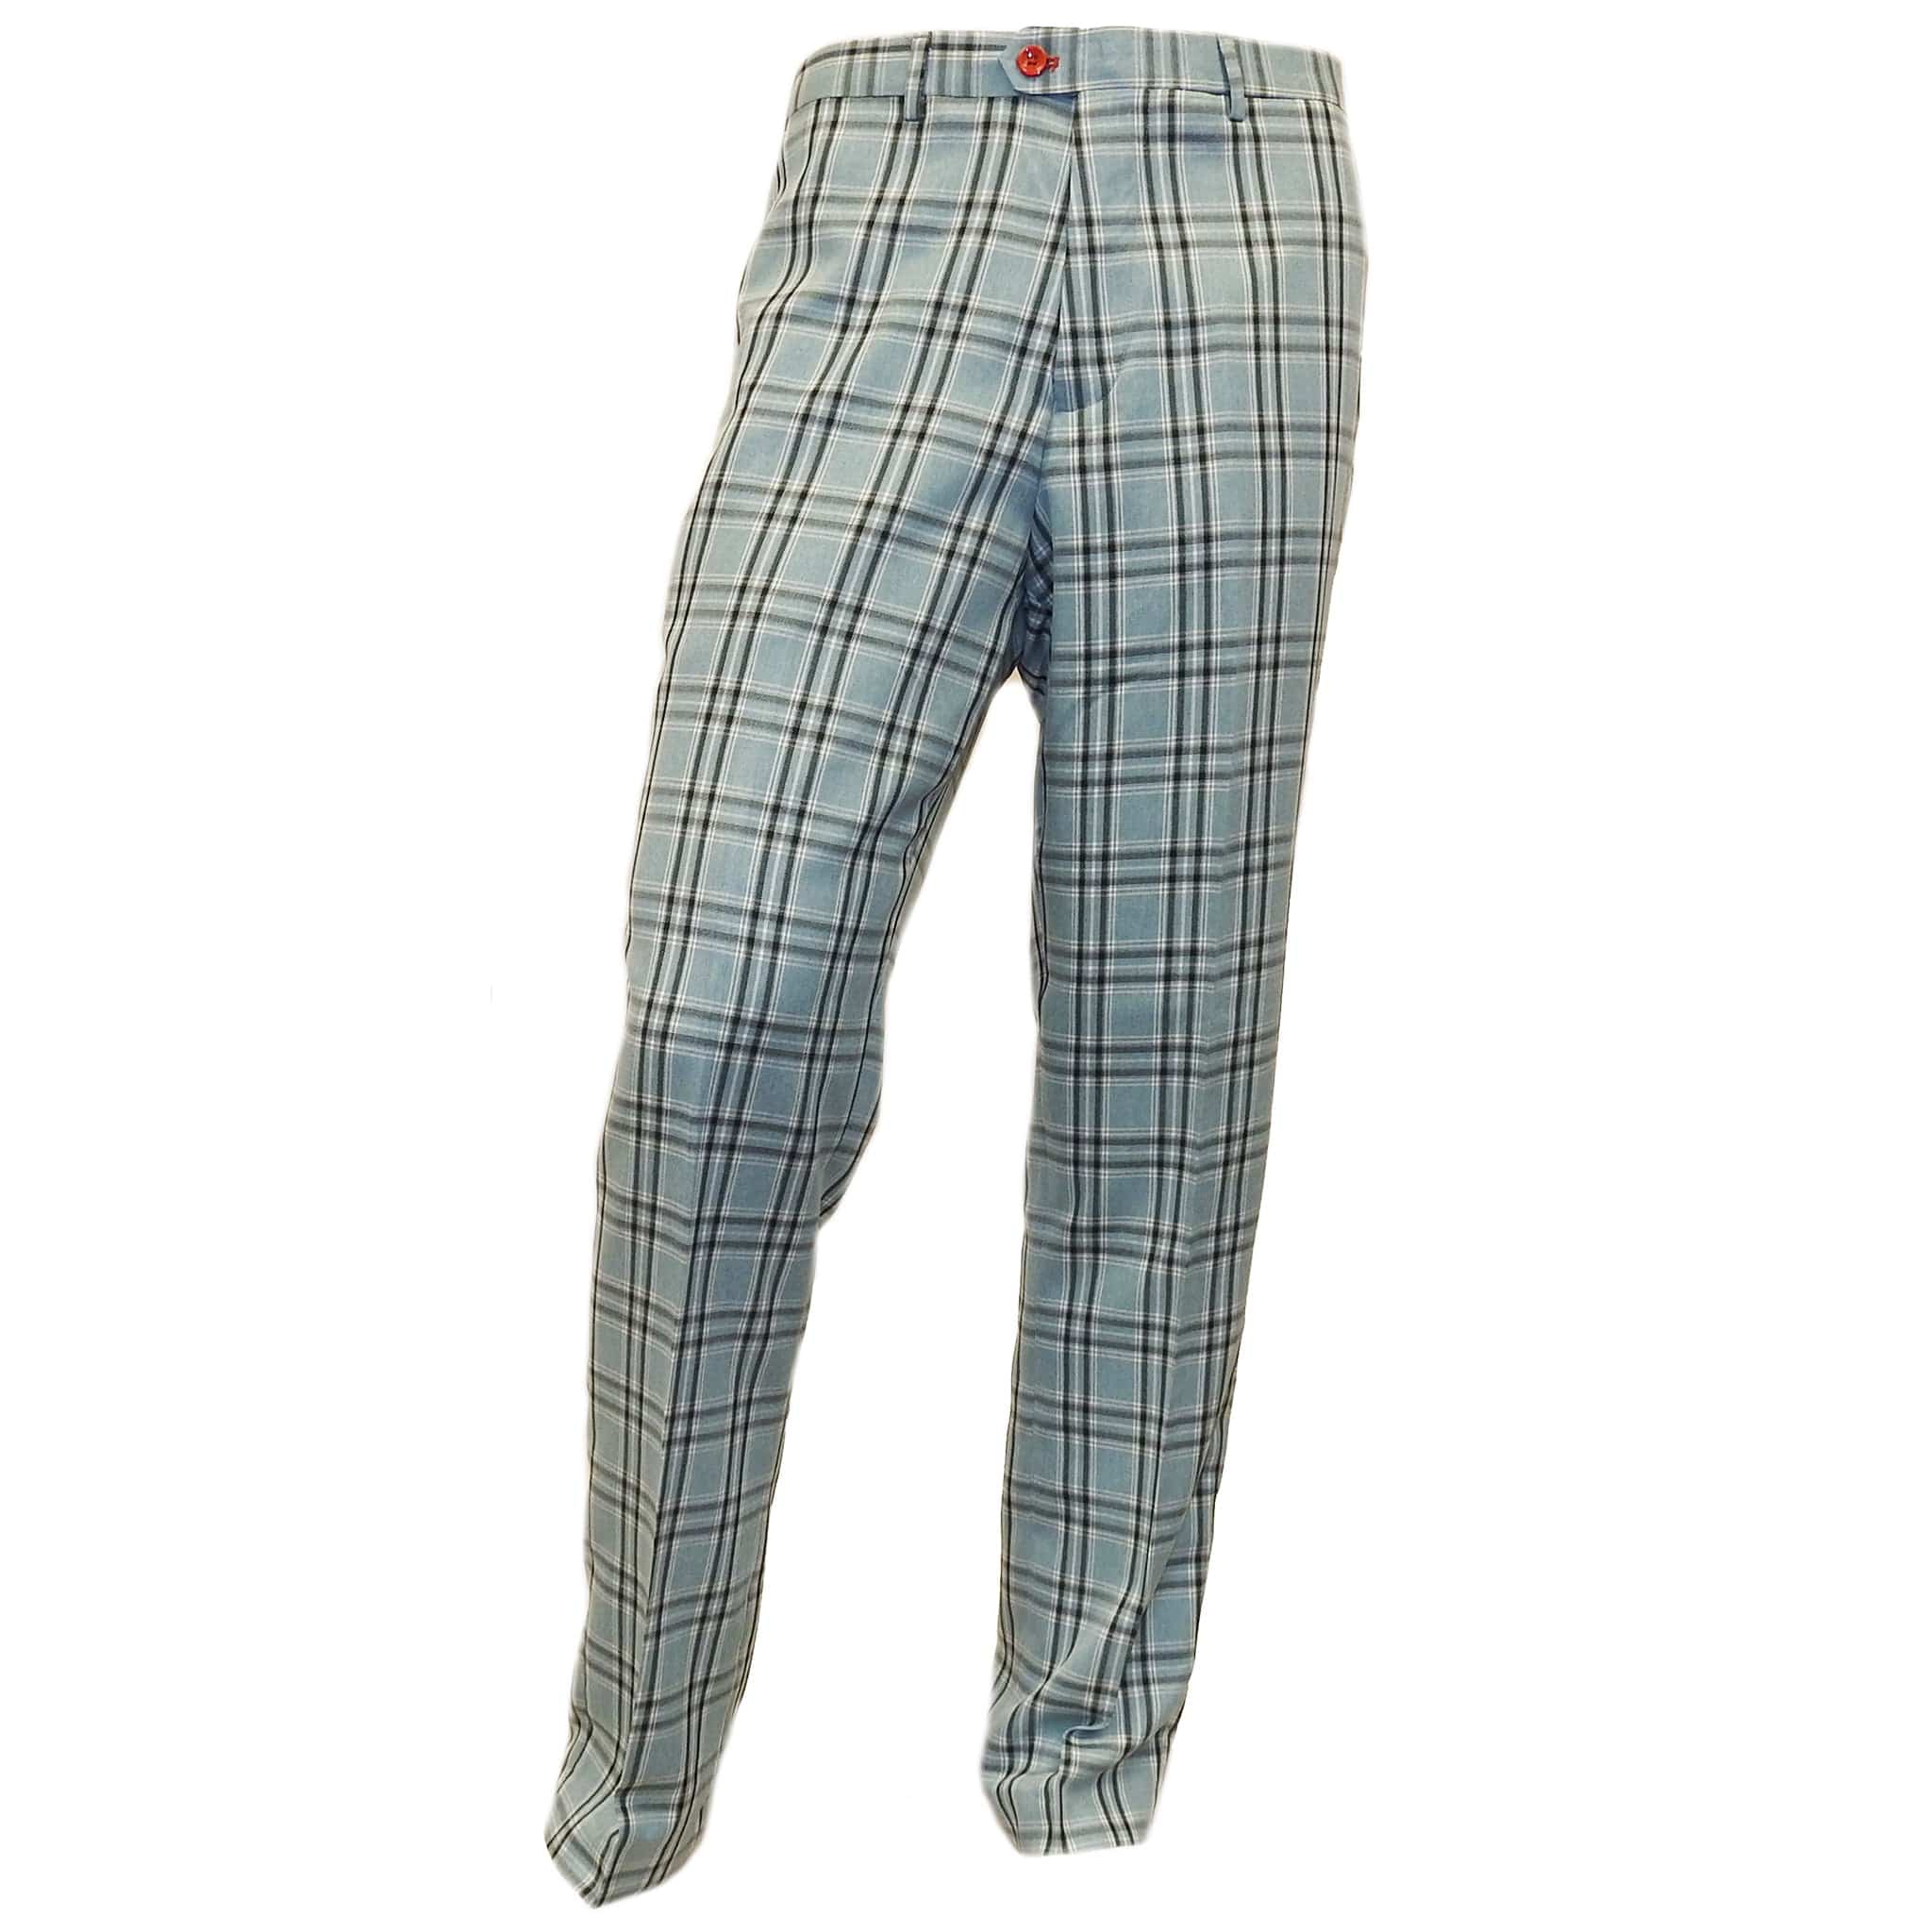 Royal & Awesome Pants − Sale: at $34.99+ | Stylight